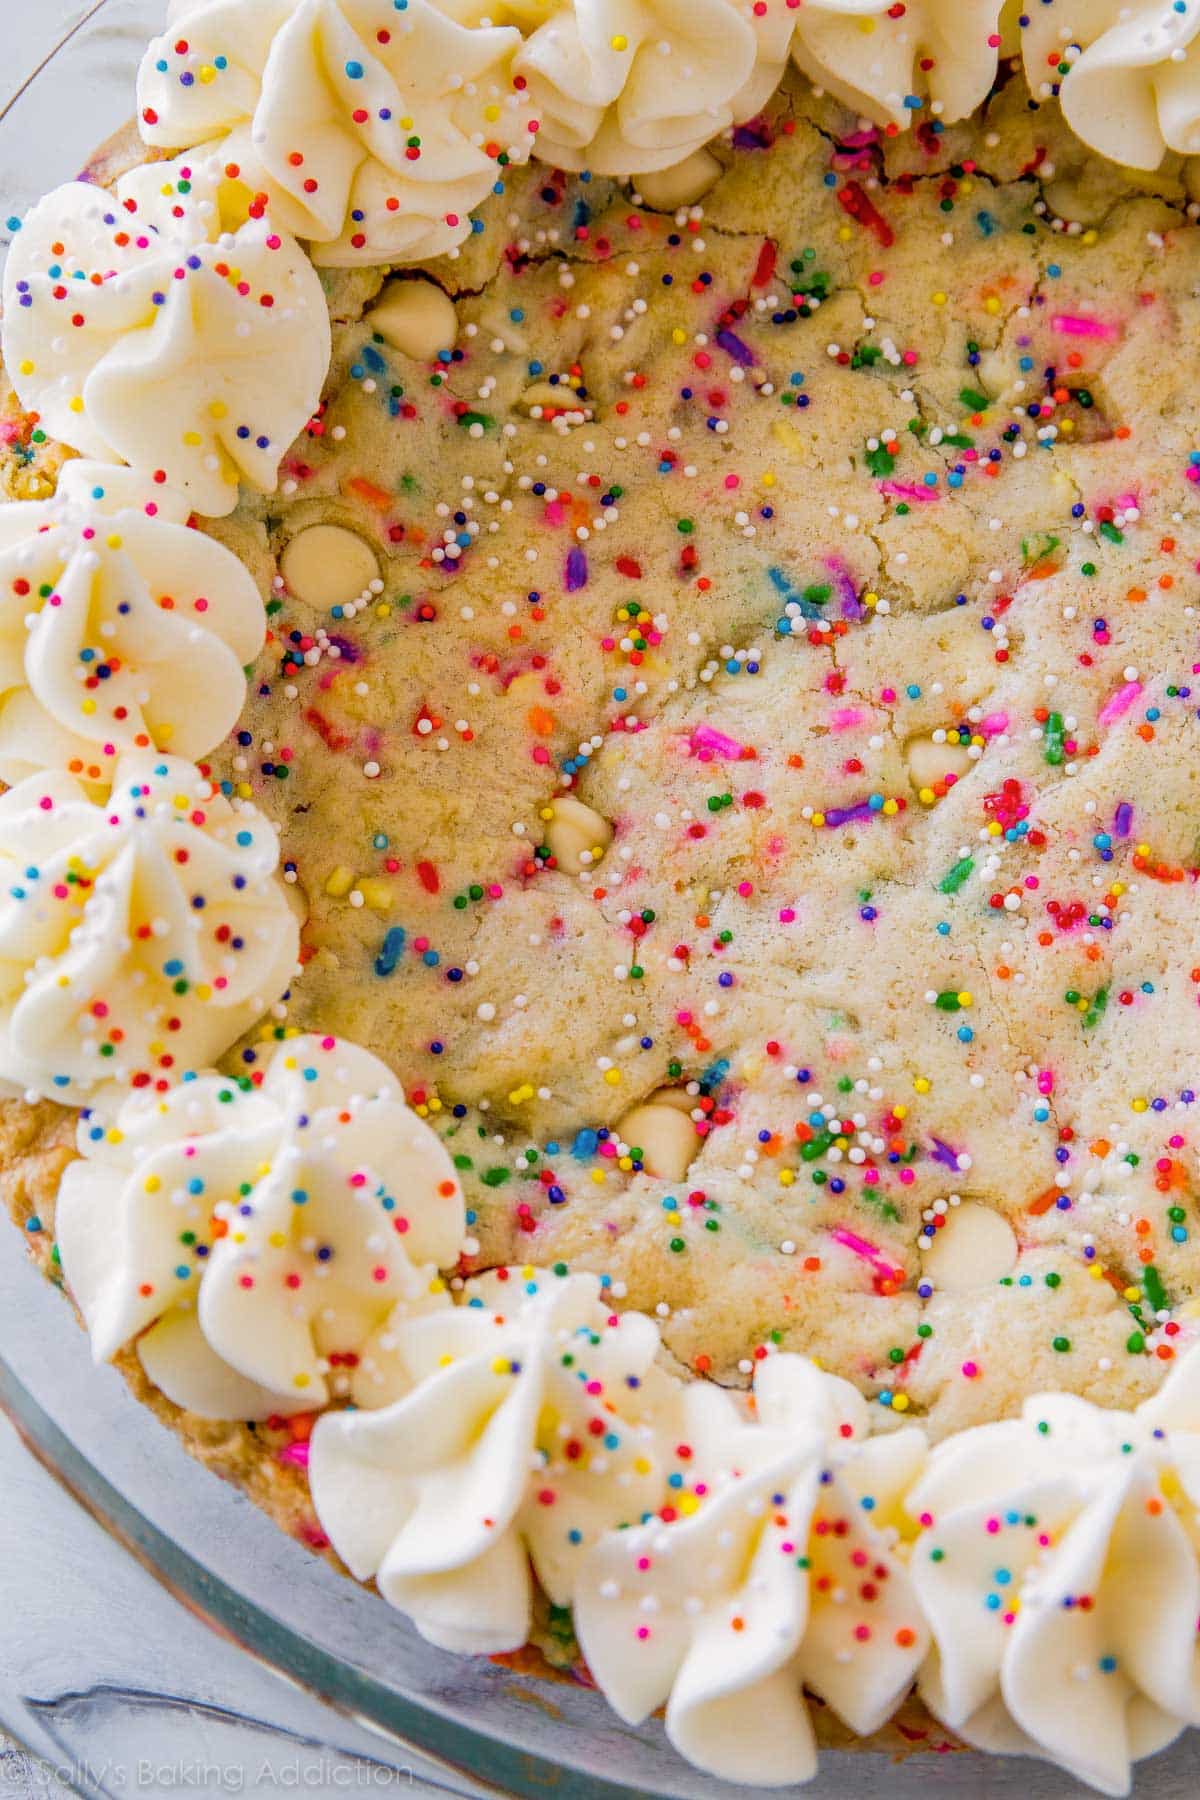 funfetti sugar cookie cake with piped frosting decorations and sprinkles in a glass baking dish